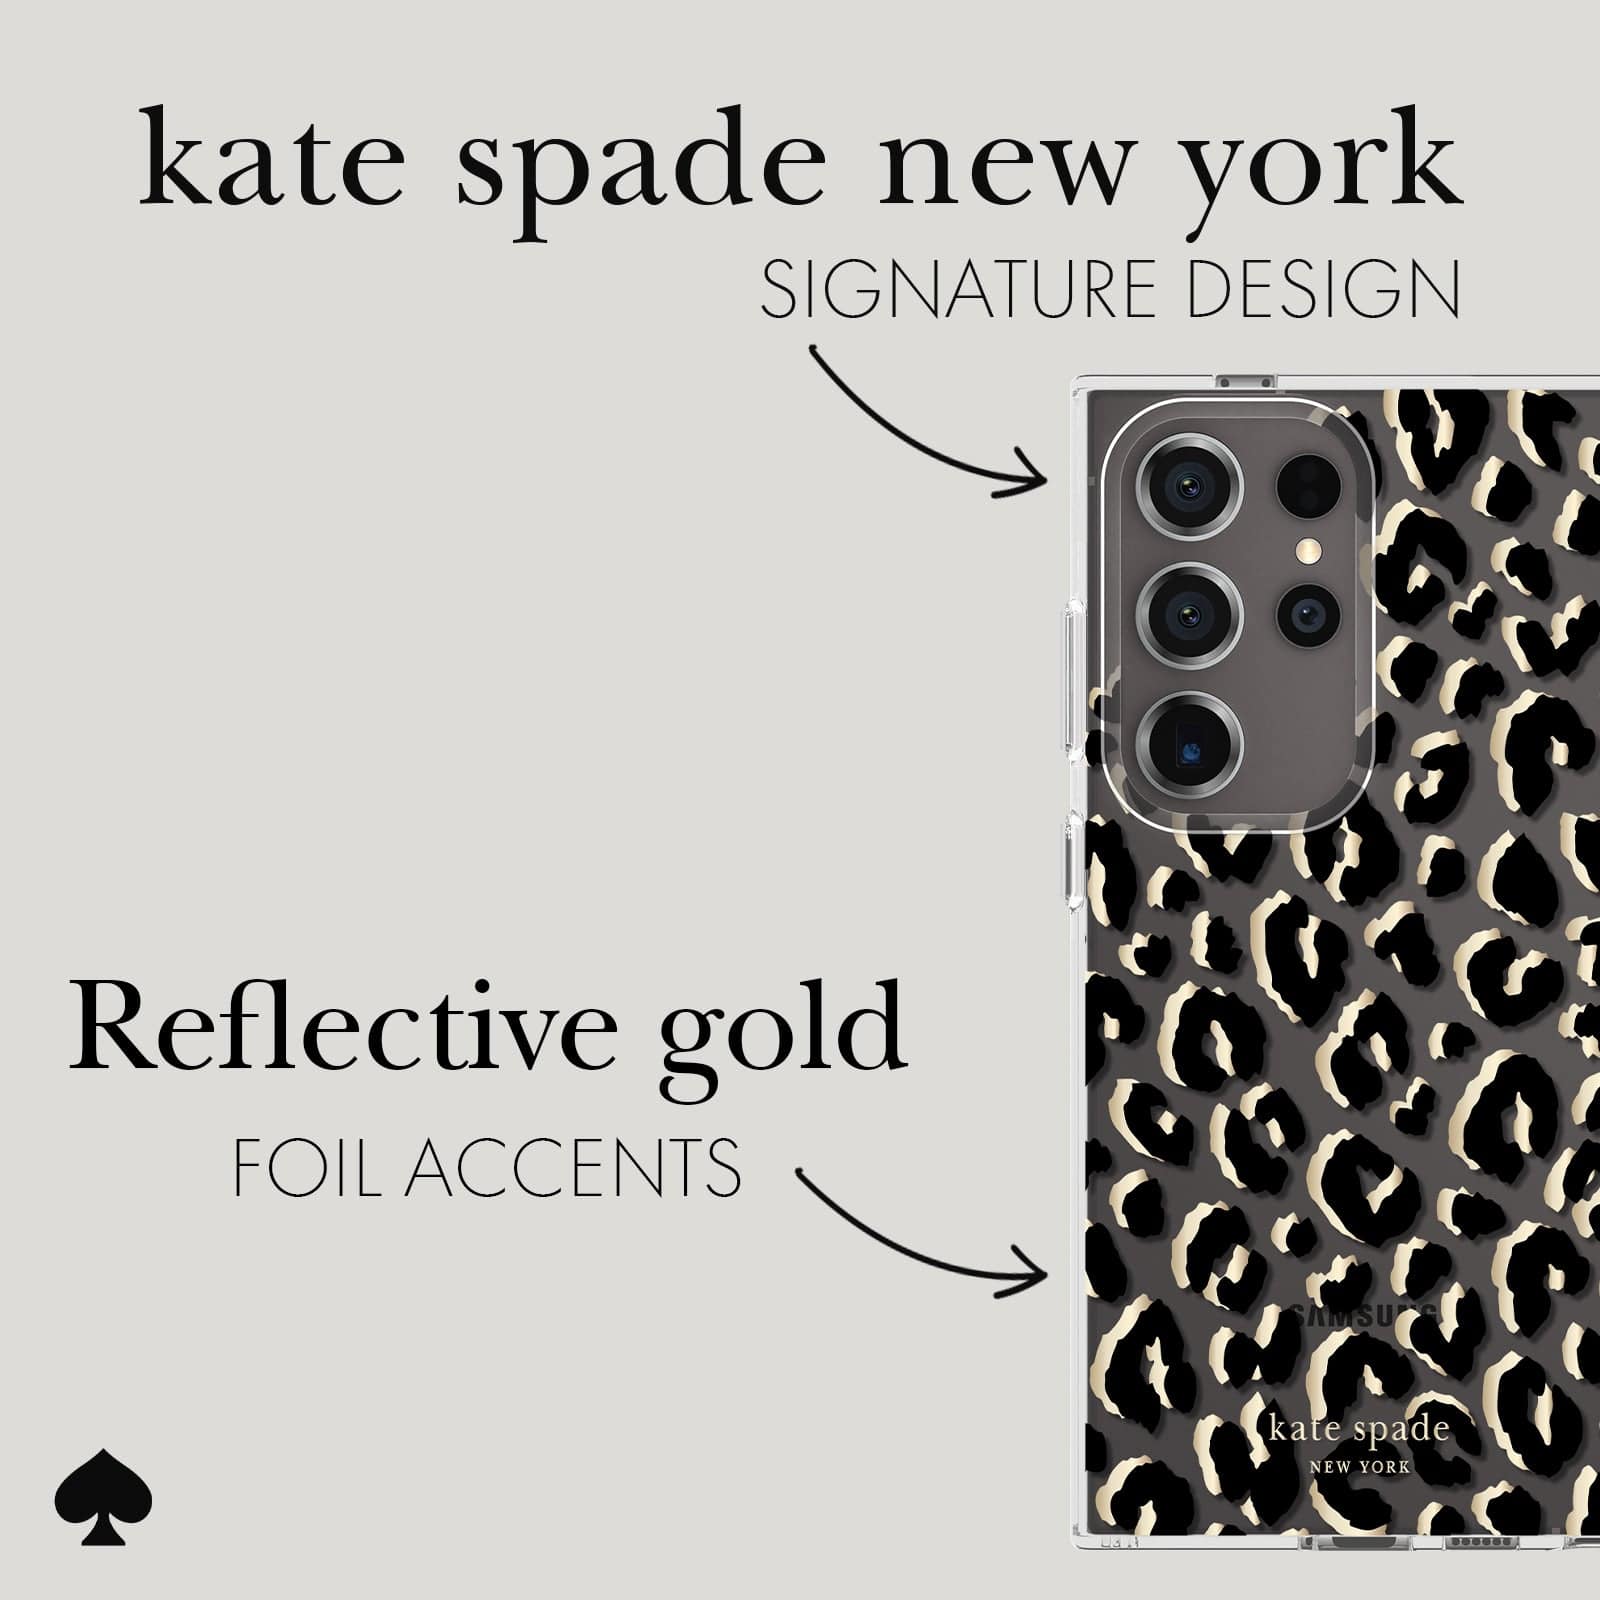 KATE SPADE NEW YORK DESIGN. REFLECTIVE GOLD FOIL ACCENTS